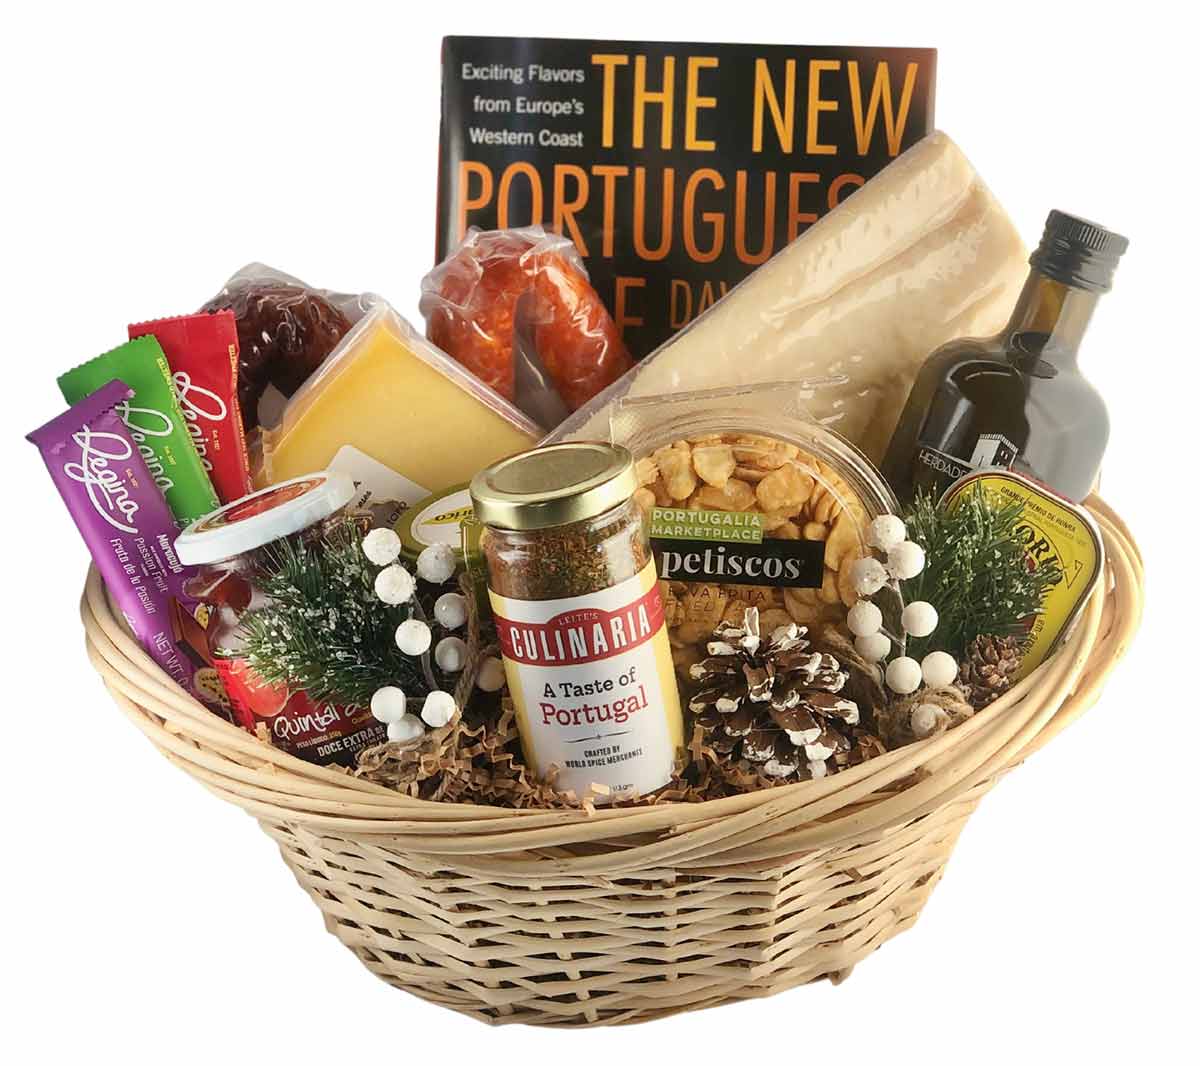 A wicker basket with spices, cheese, olive oil, chocolates, and a cookbook.